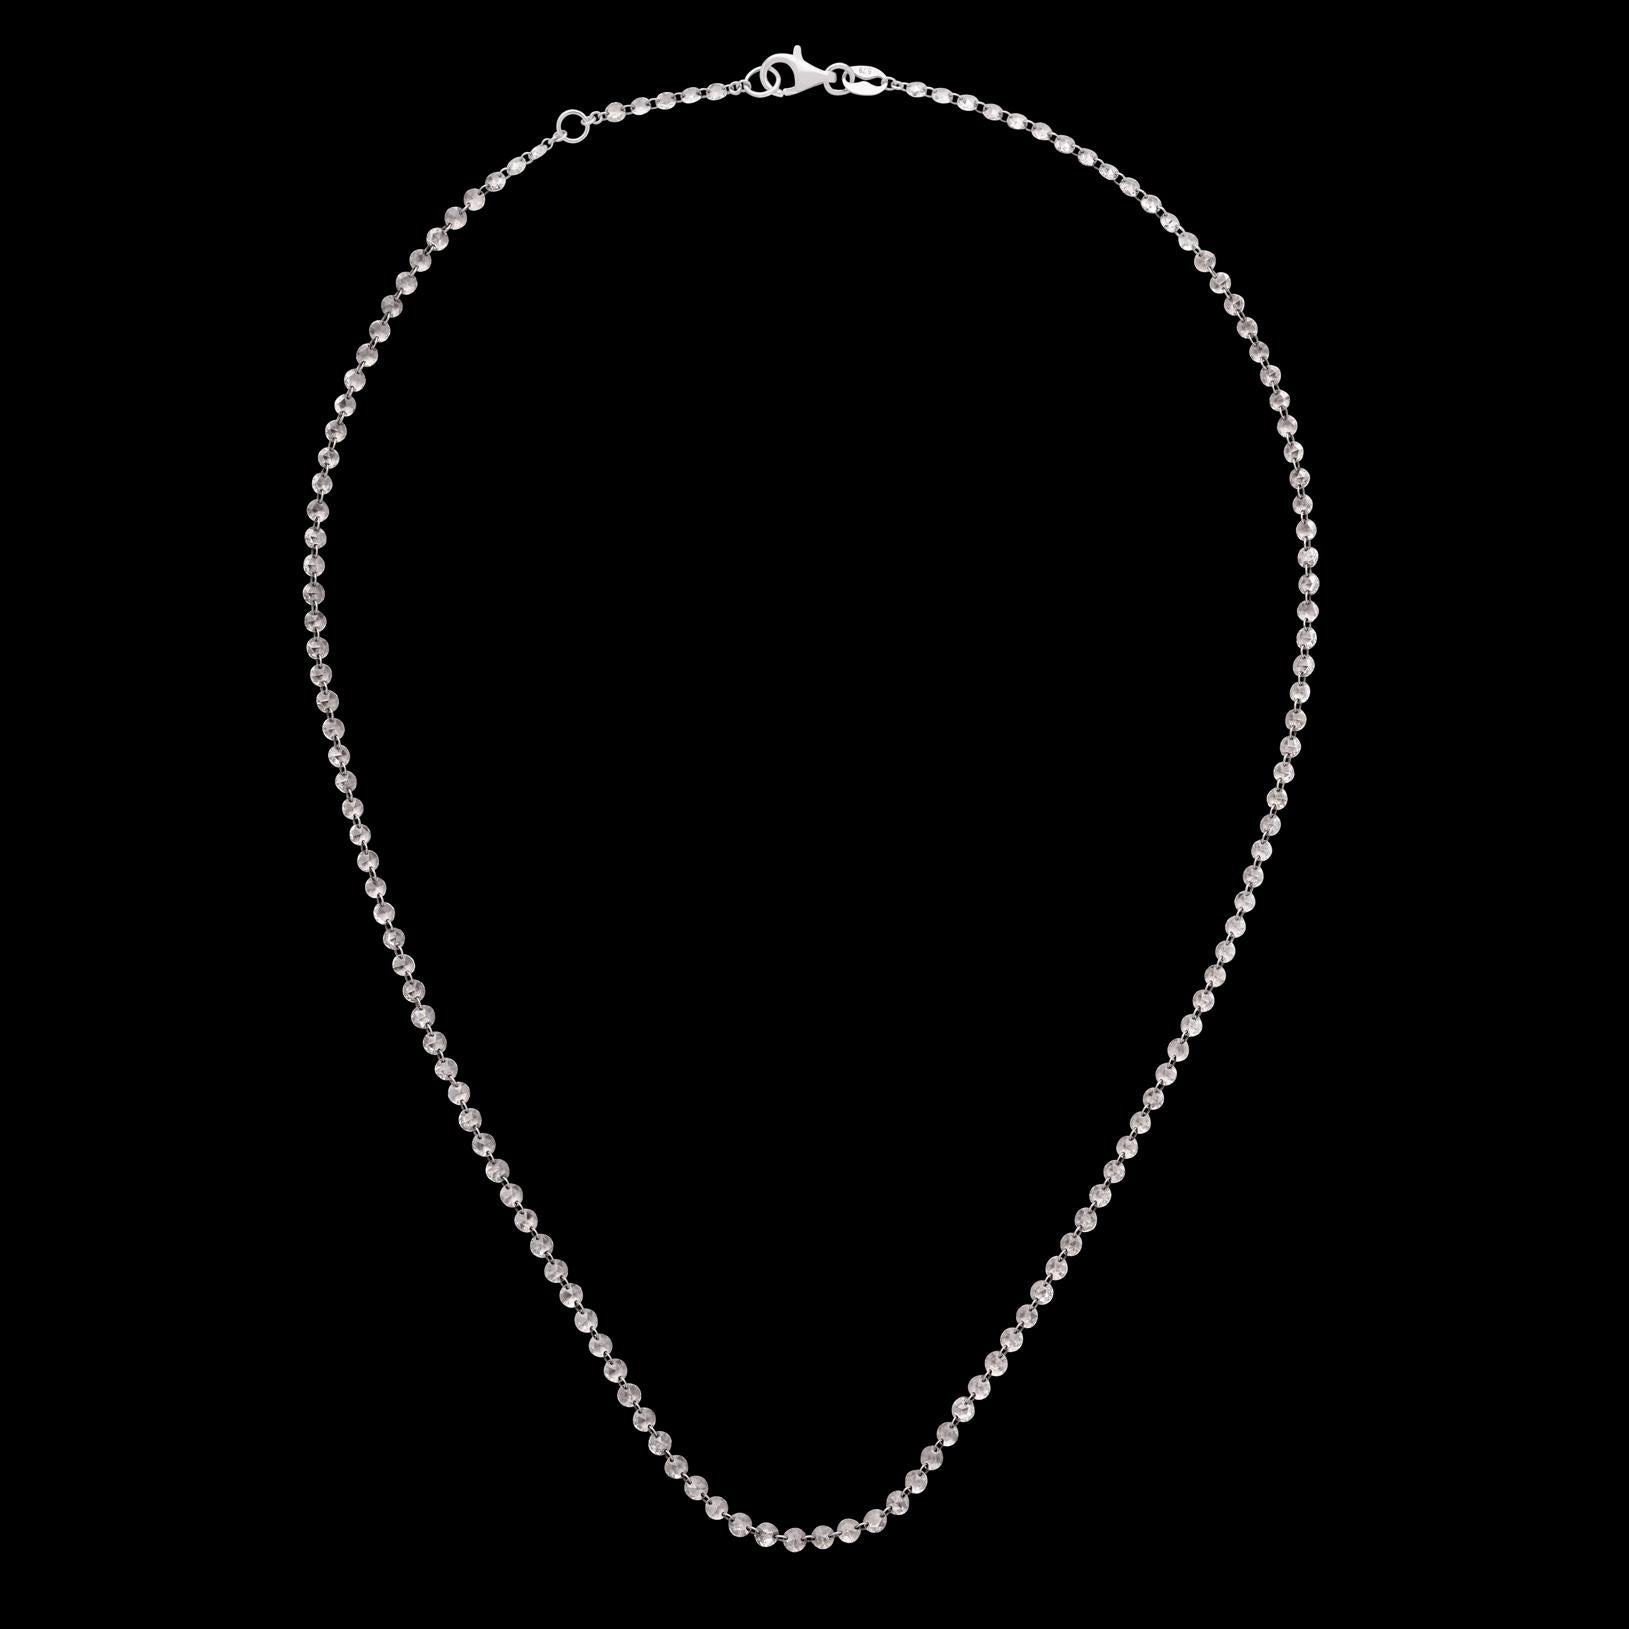 18kt White Gold 5.79 Carat Diamond Necklace In New Condition For Sale In San Francisco, CA